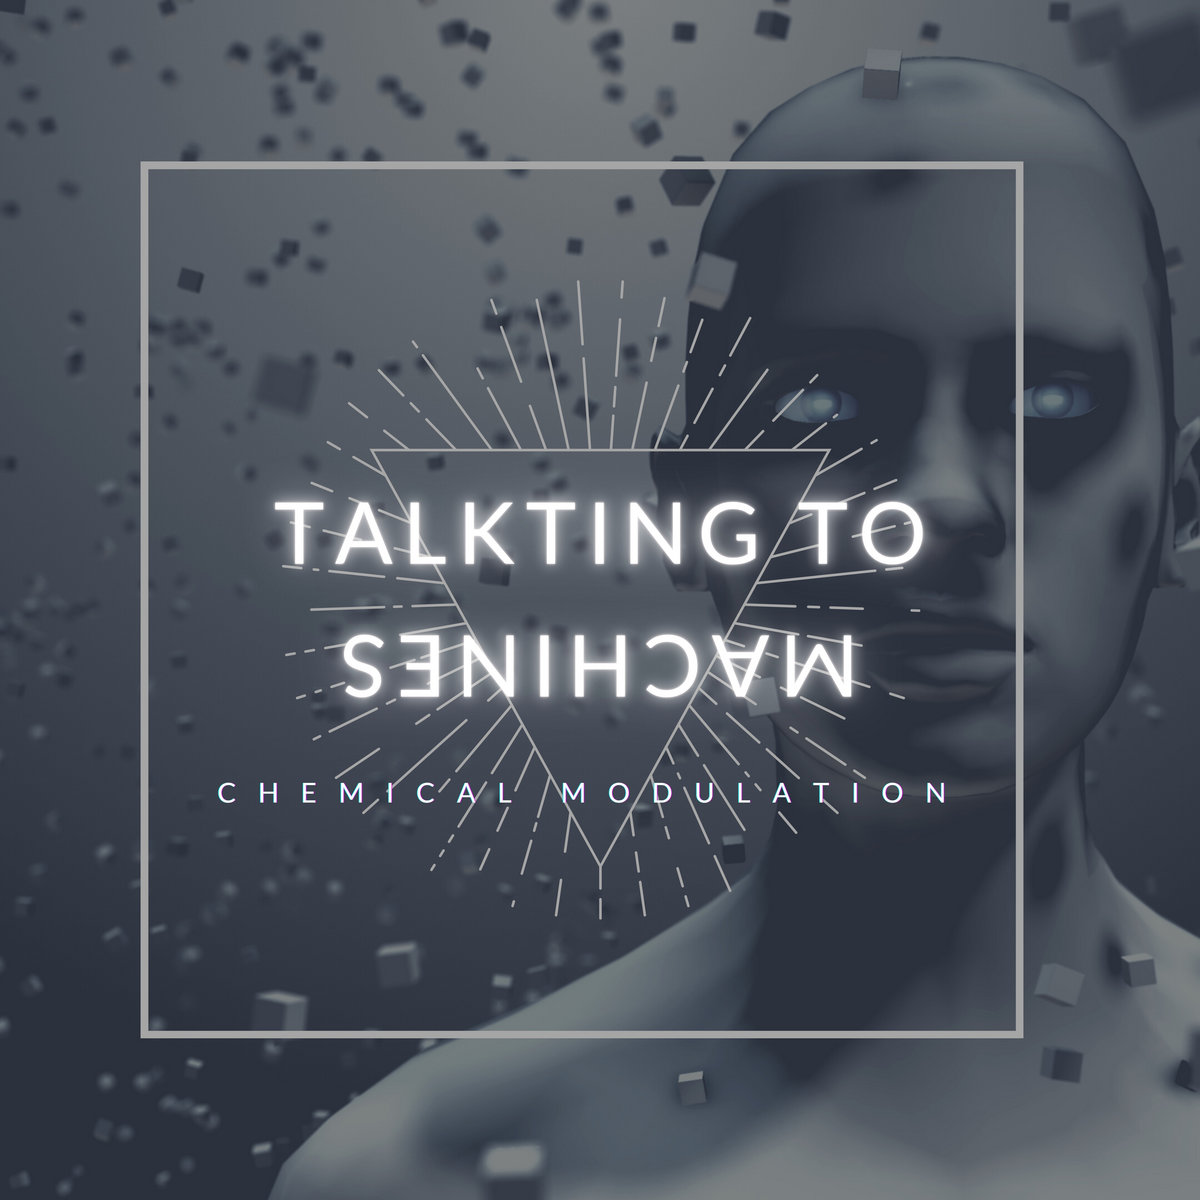 Talking to Machines is out